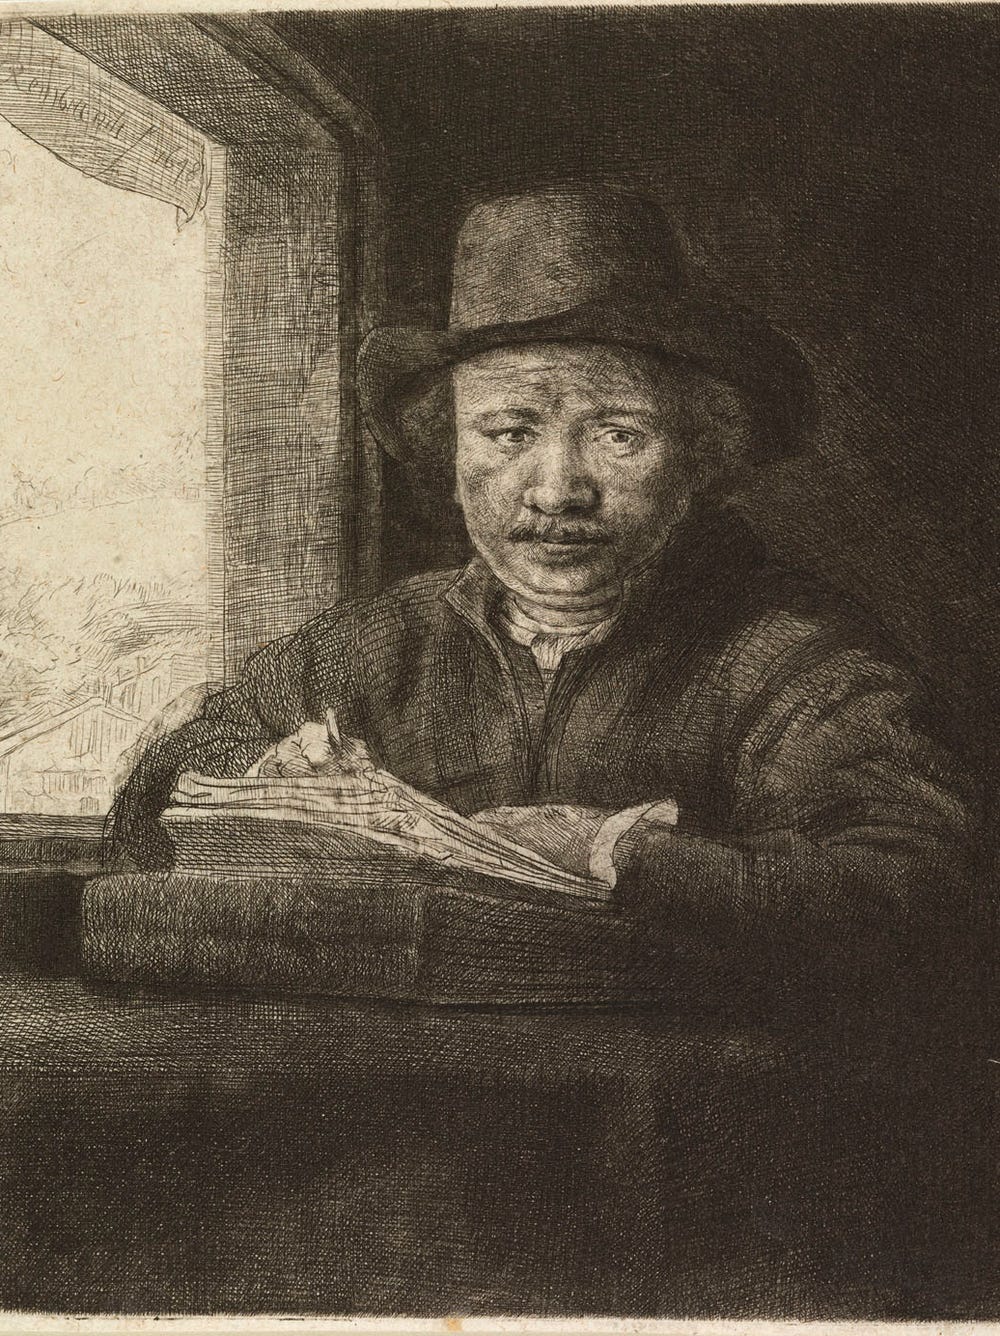 Drawing of a man seated with a pen and paper.